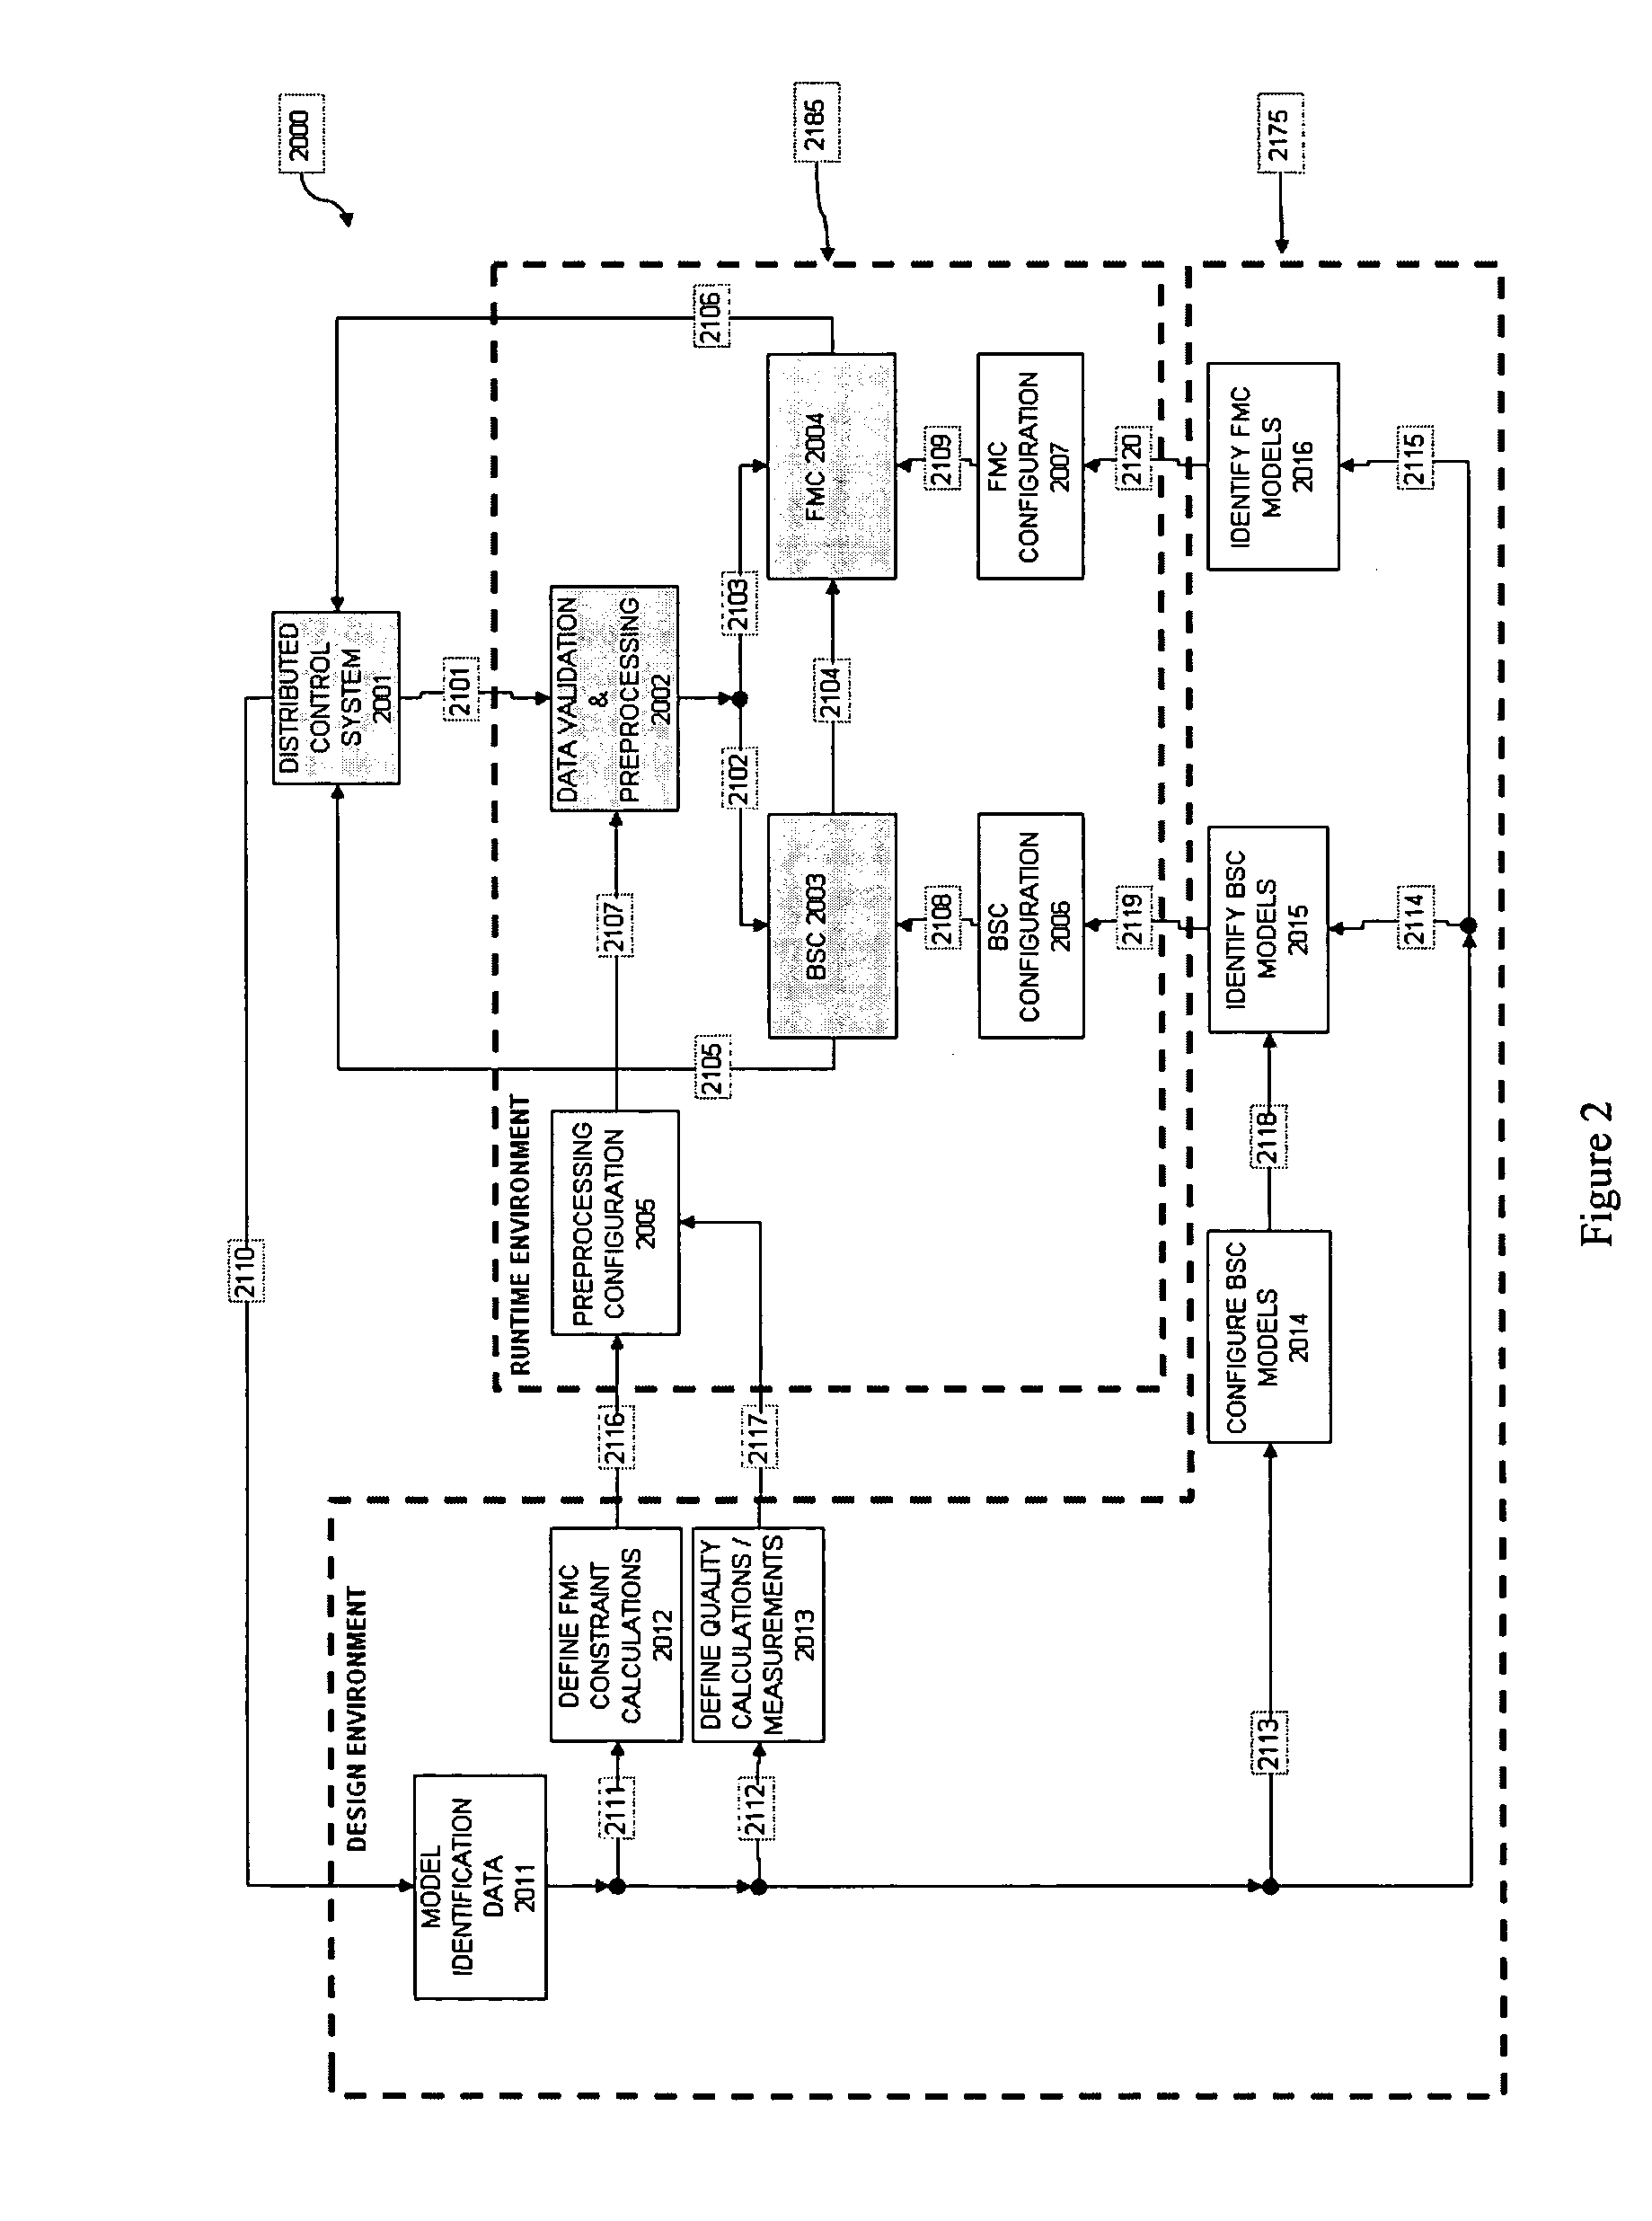 Methods, systems, and articles for controlling a fluid blending system